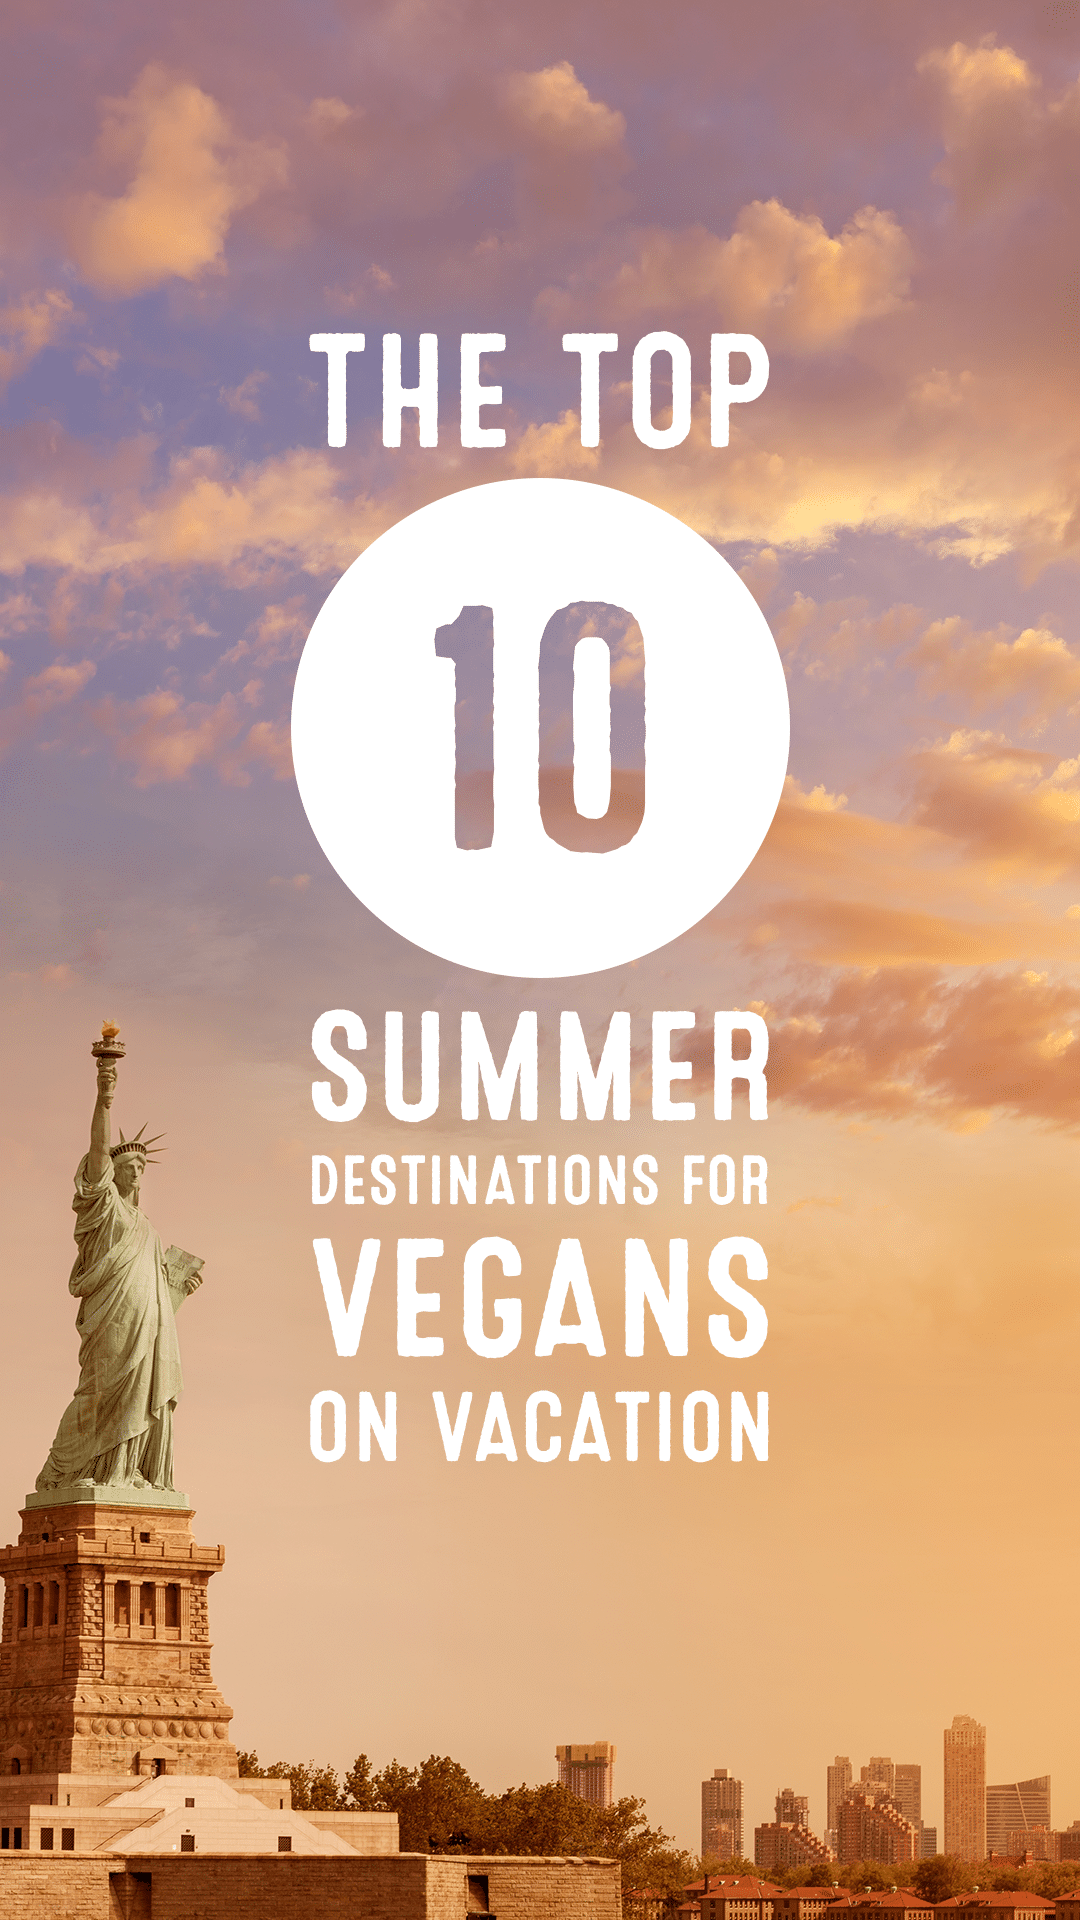 The Top 10 Summer Destinations for Vegans on Vacation